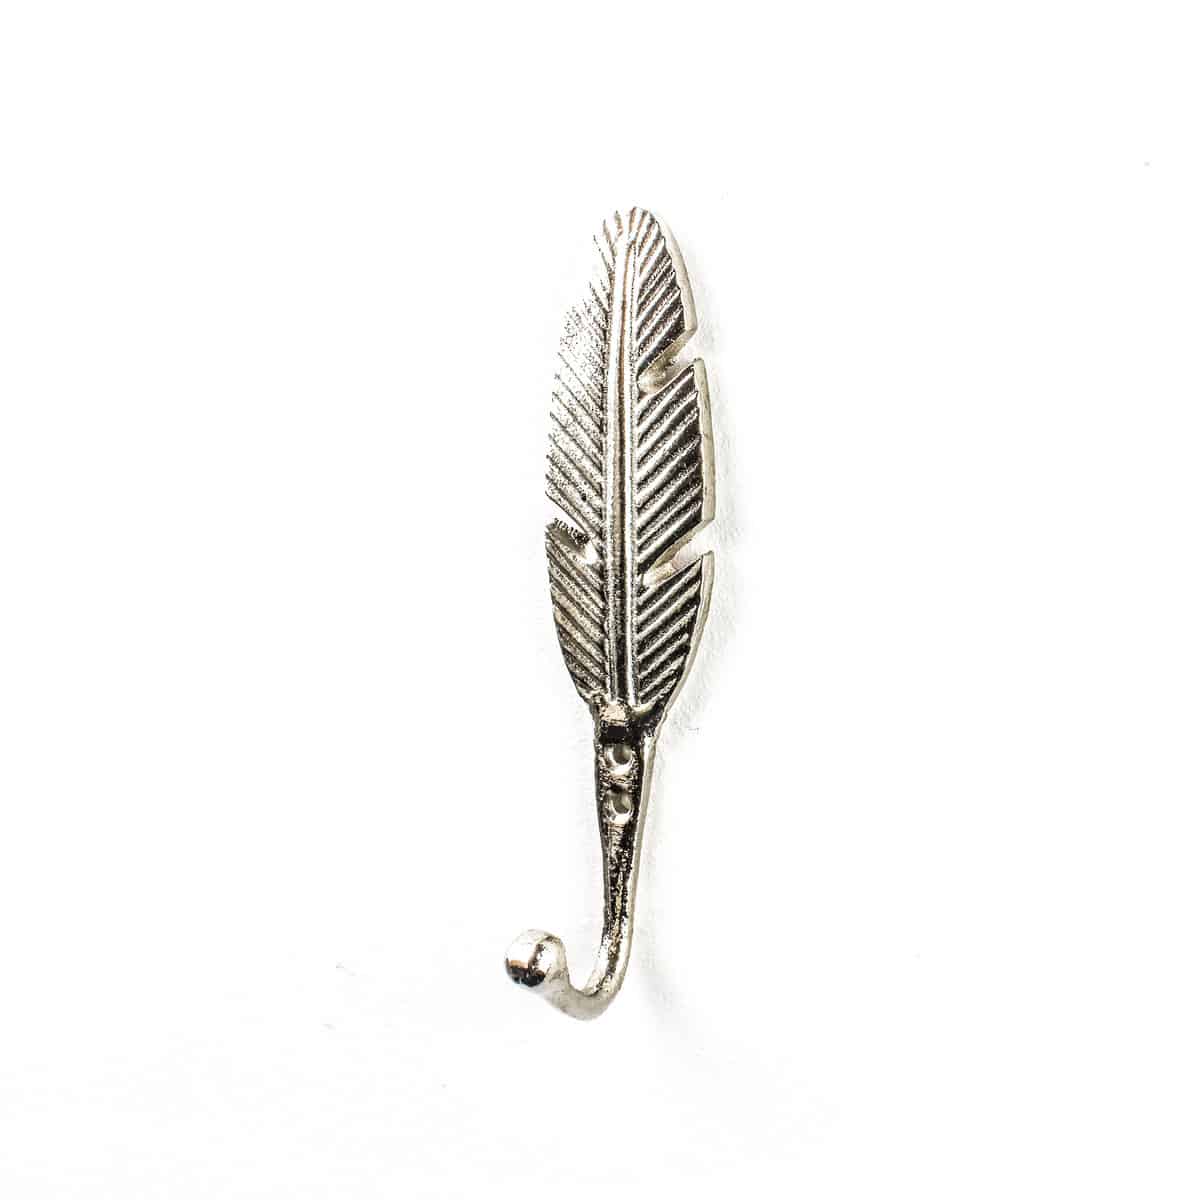 Silver Feather Wall Hook - Shop for cabinet knobs and wall hooks online